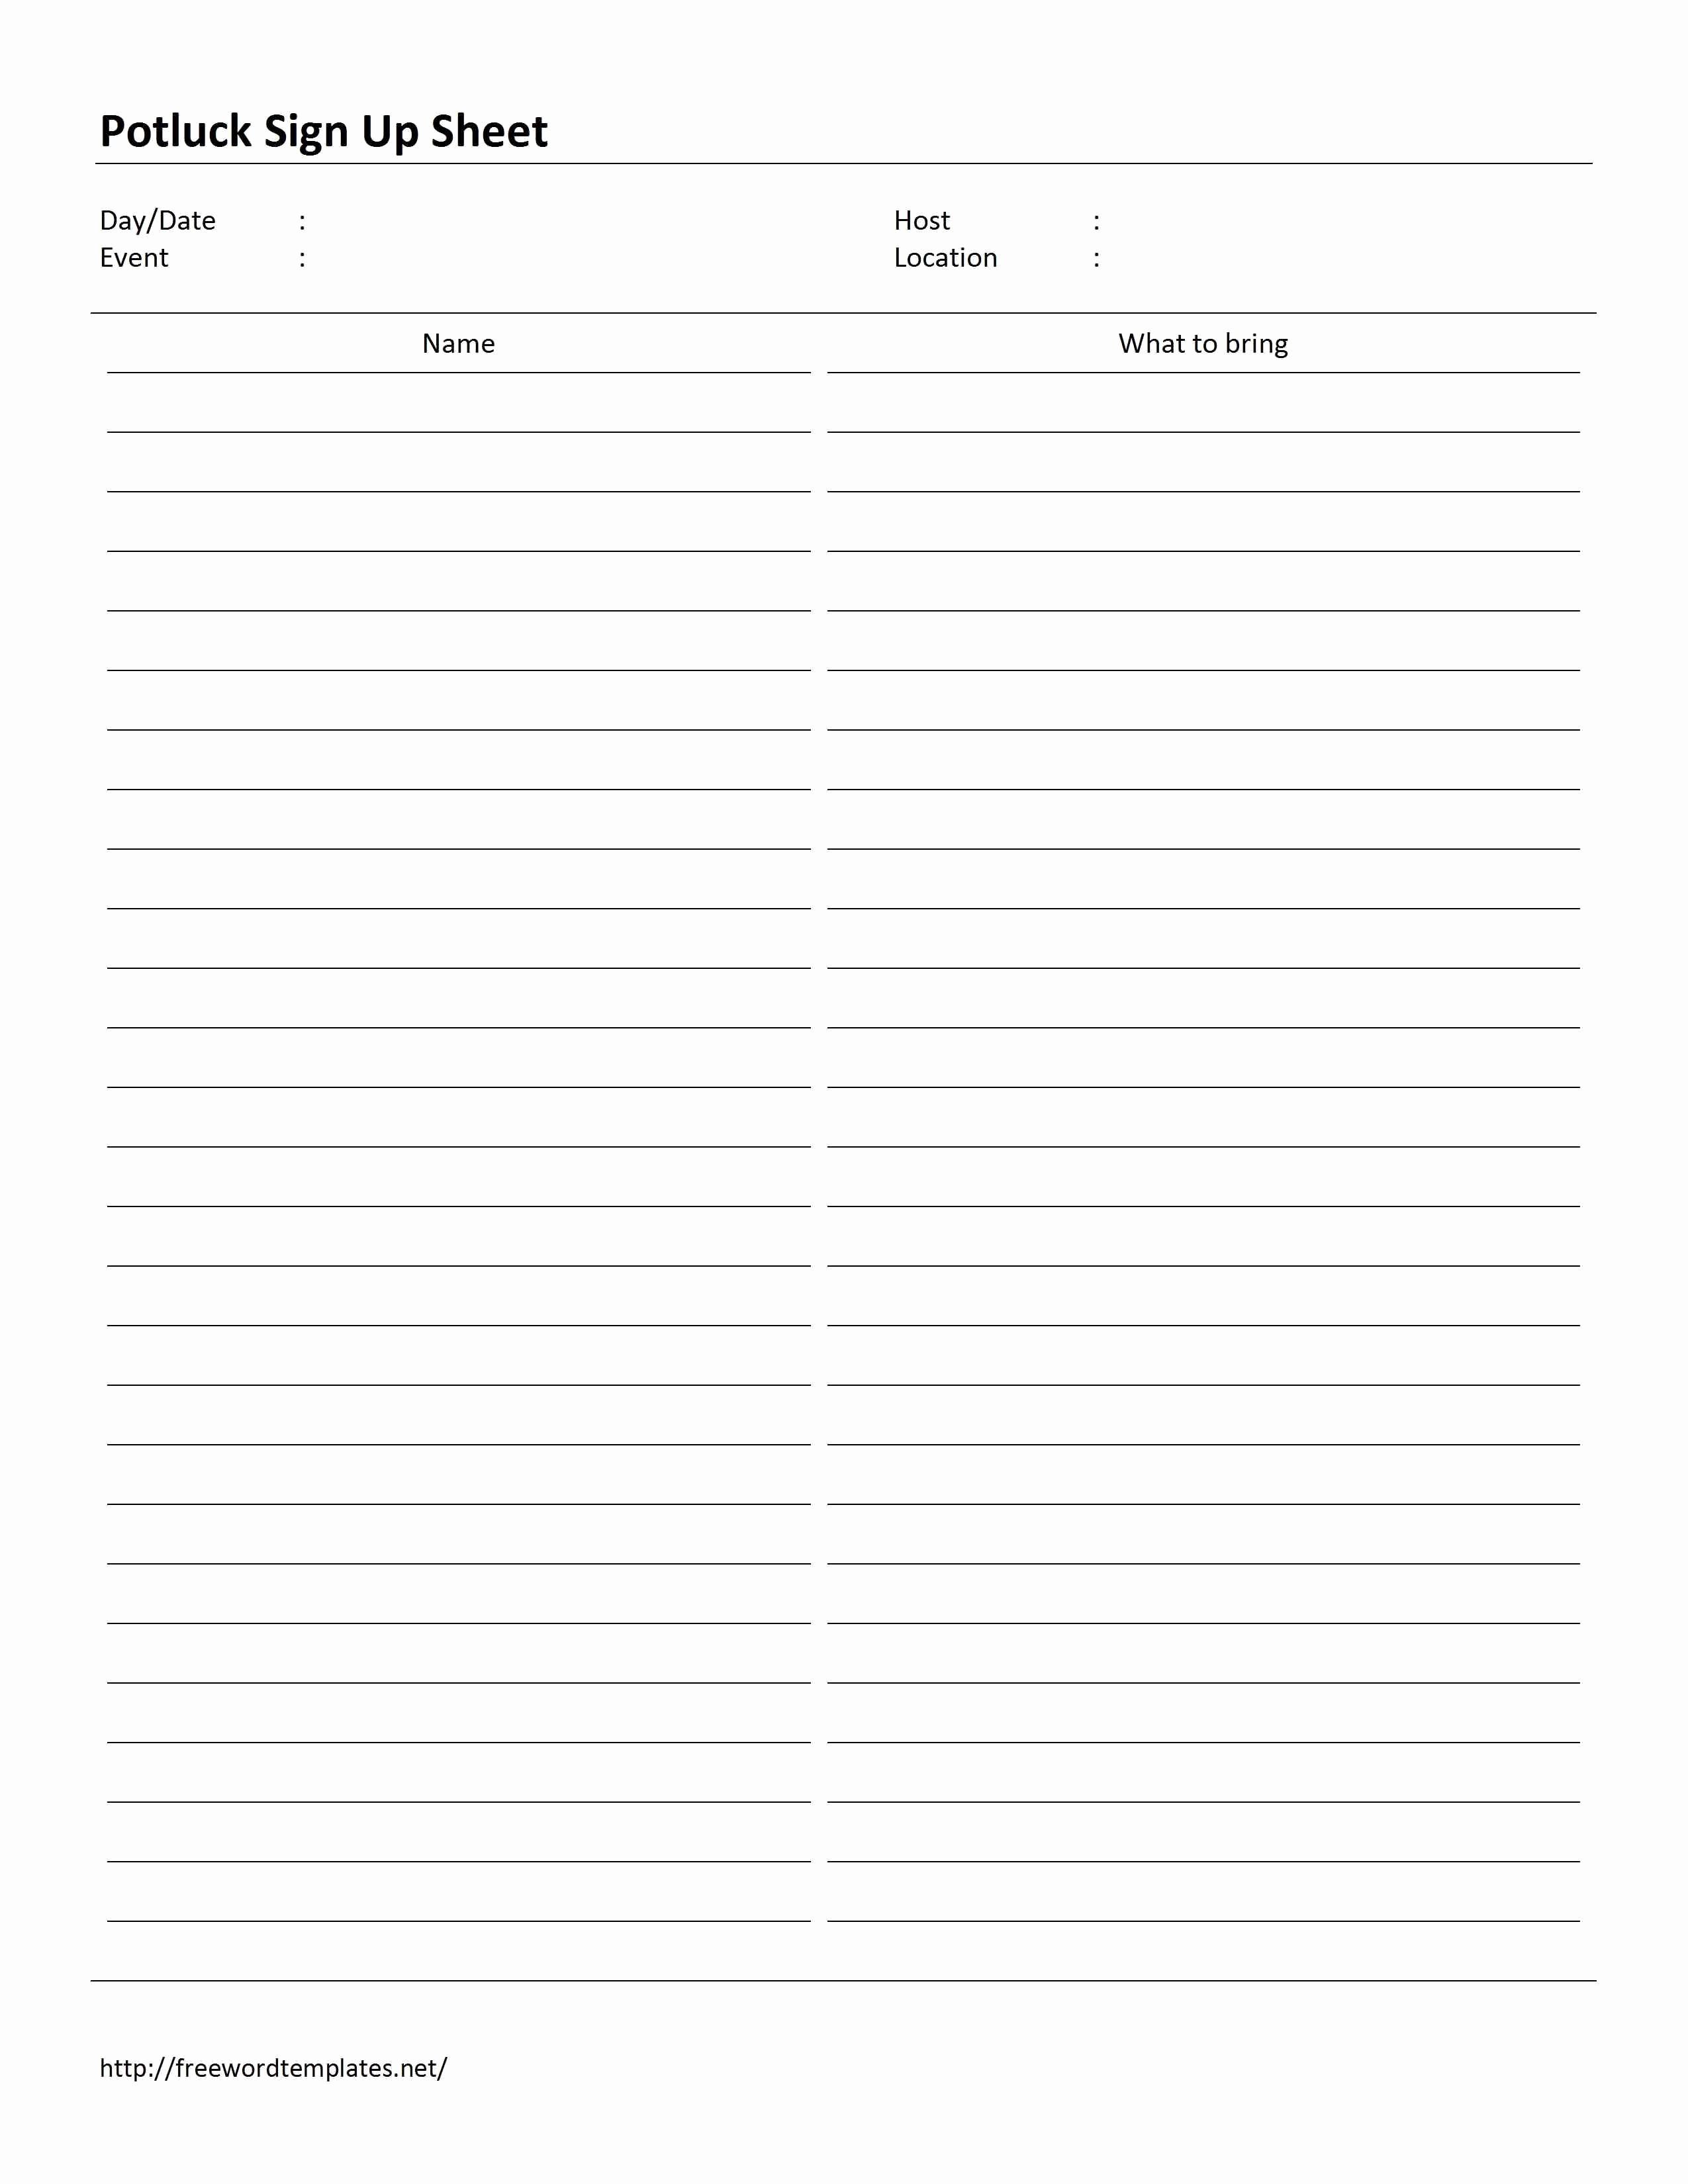 Email Sign Up Sheet Template Unique Potluck Sign Up Sheet Template Word